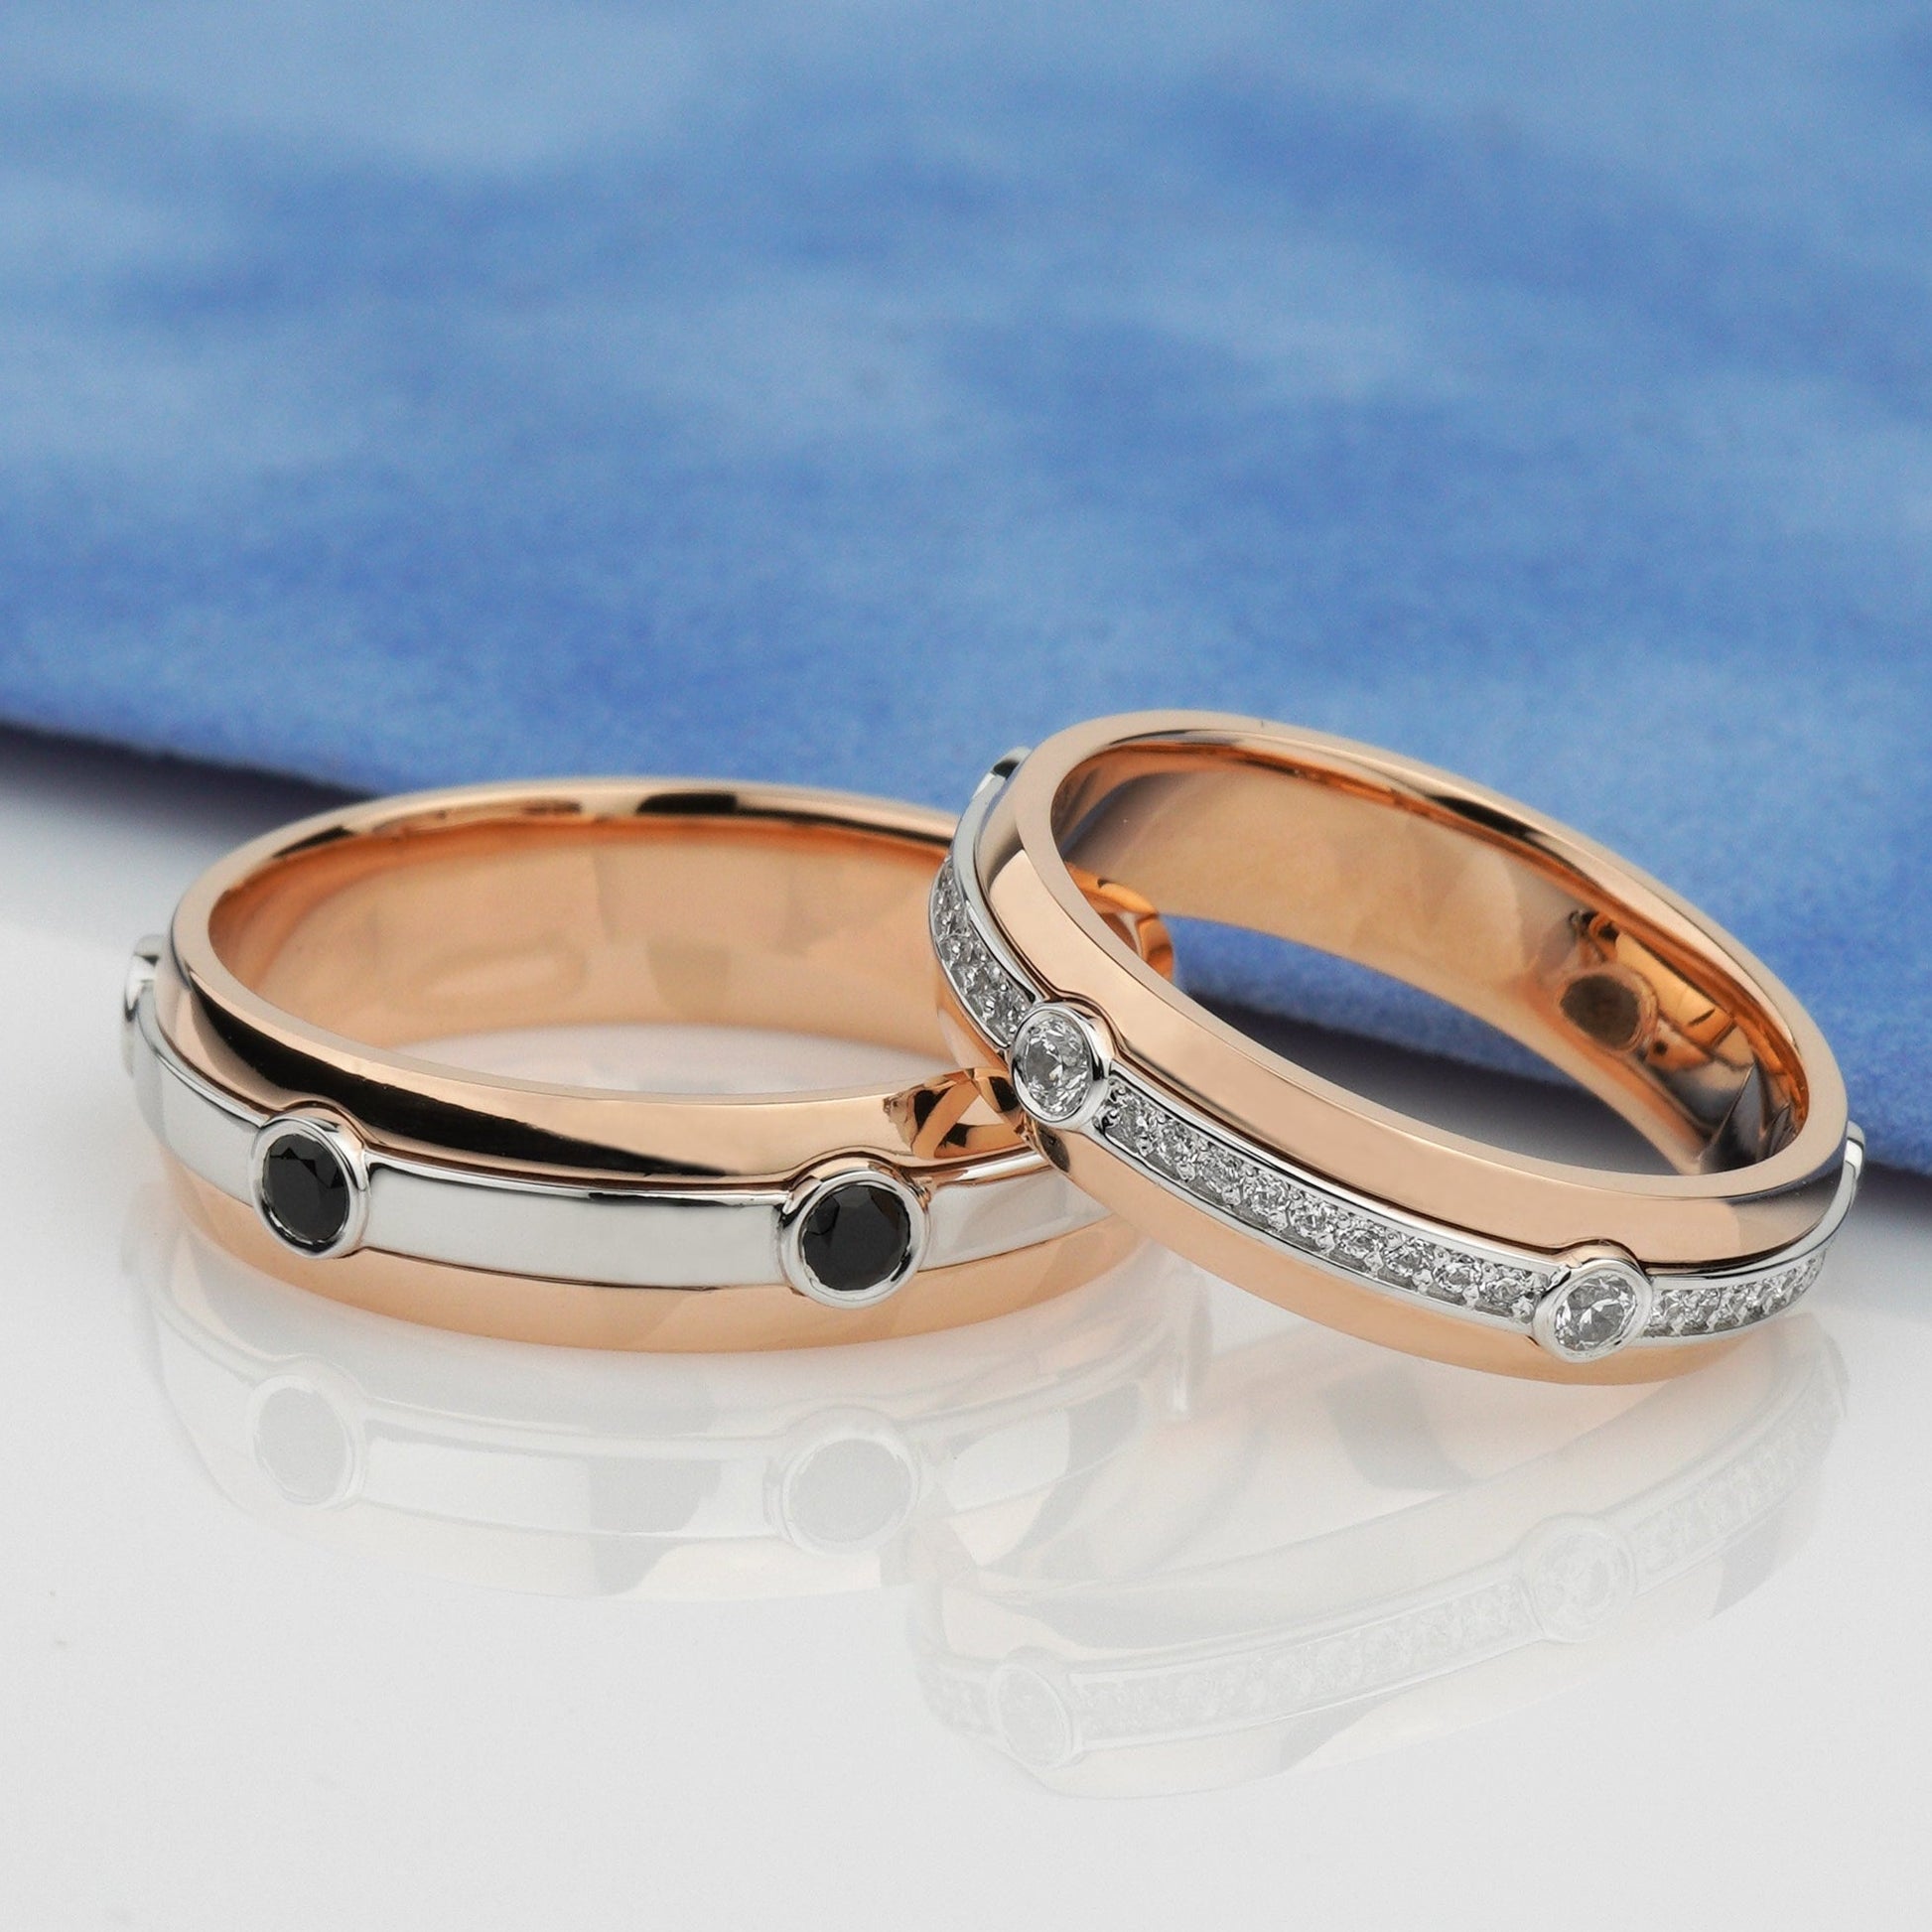 Two-tone matching wedding bands with black and white diamonds. Unique wedding bands set. His and hers wedding bands. Couple rings set. Matching wedding bands. Diamond gold rings. Diamond wedding bands